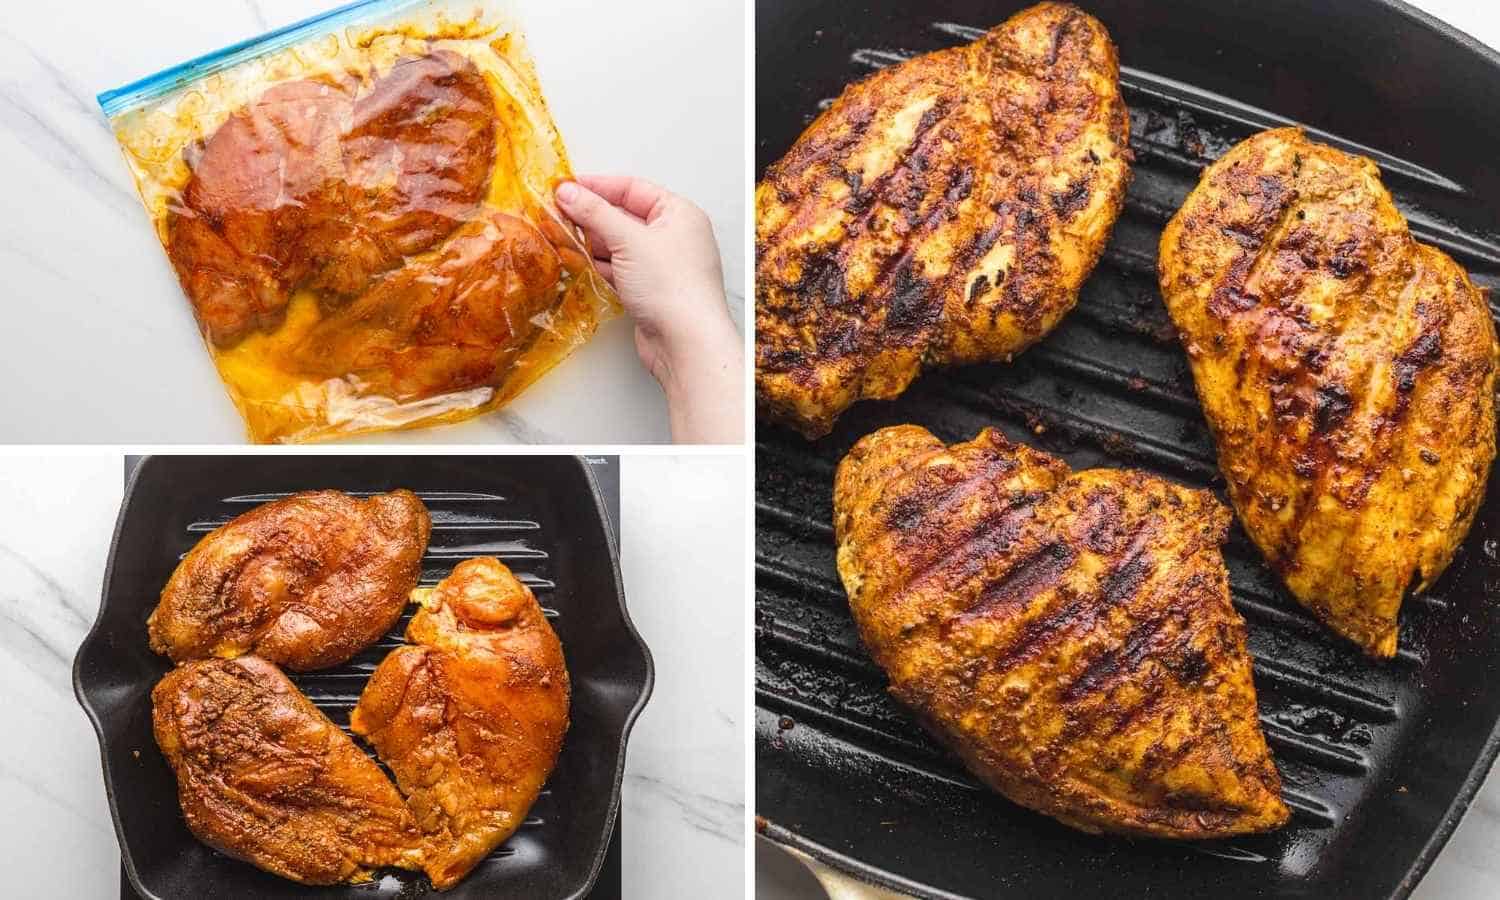 A collage with 3 images on how to grill chicken in a grill pan